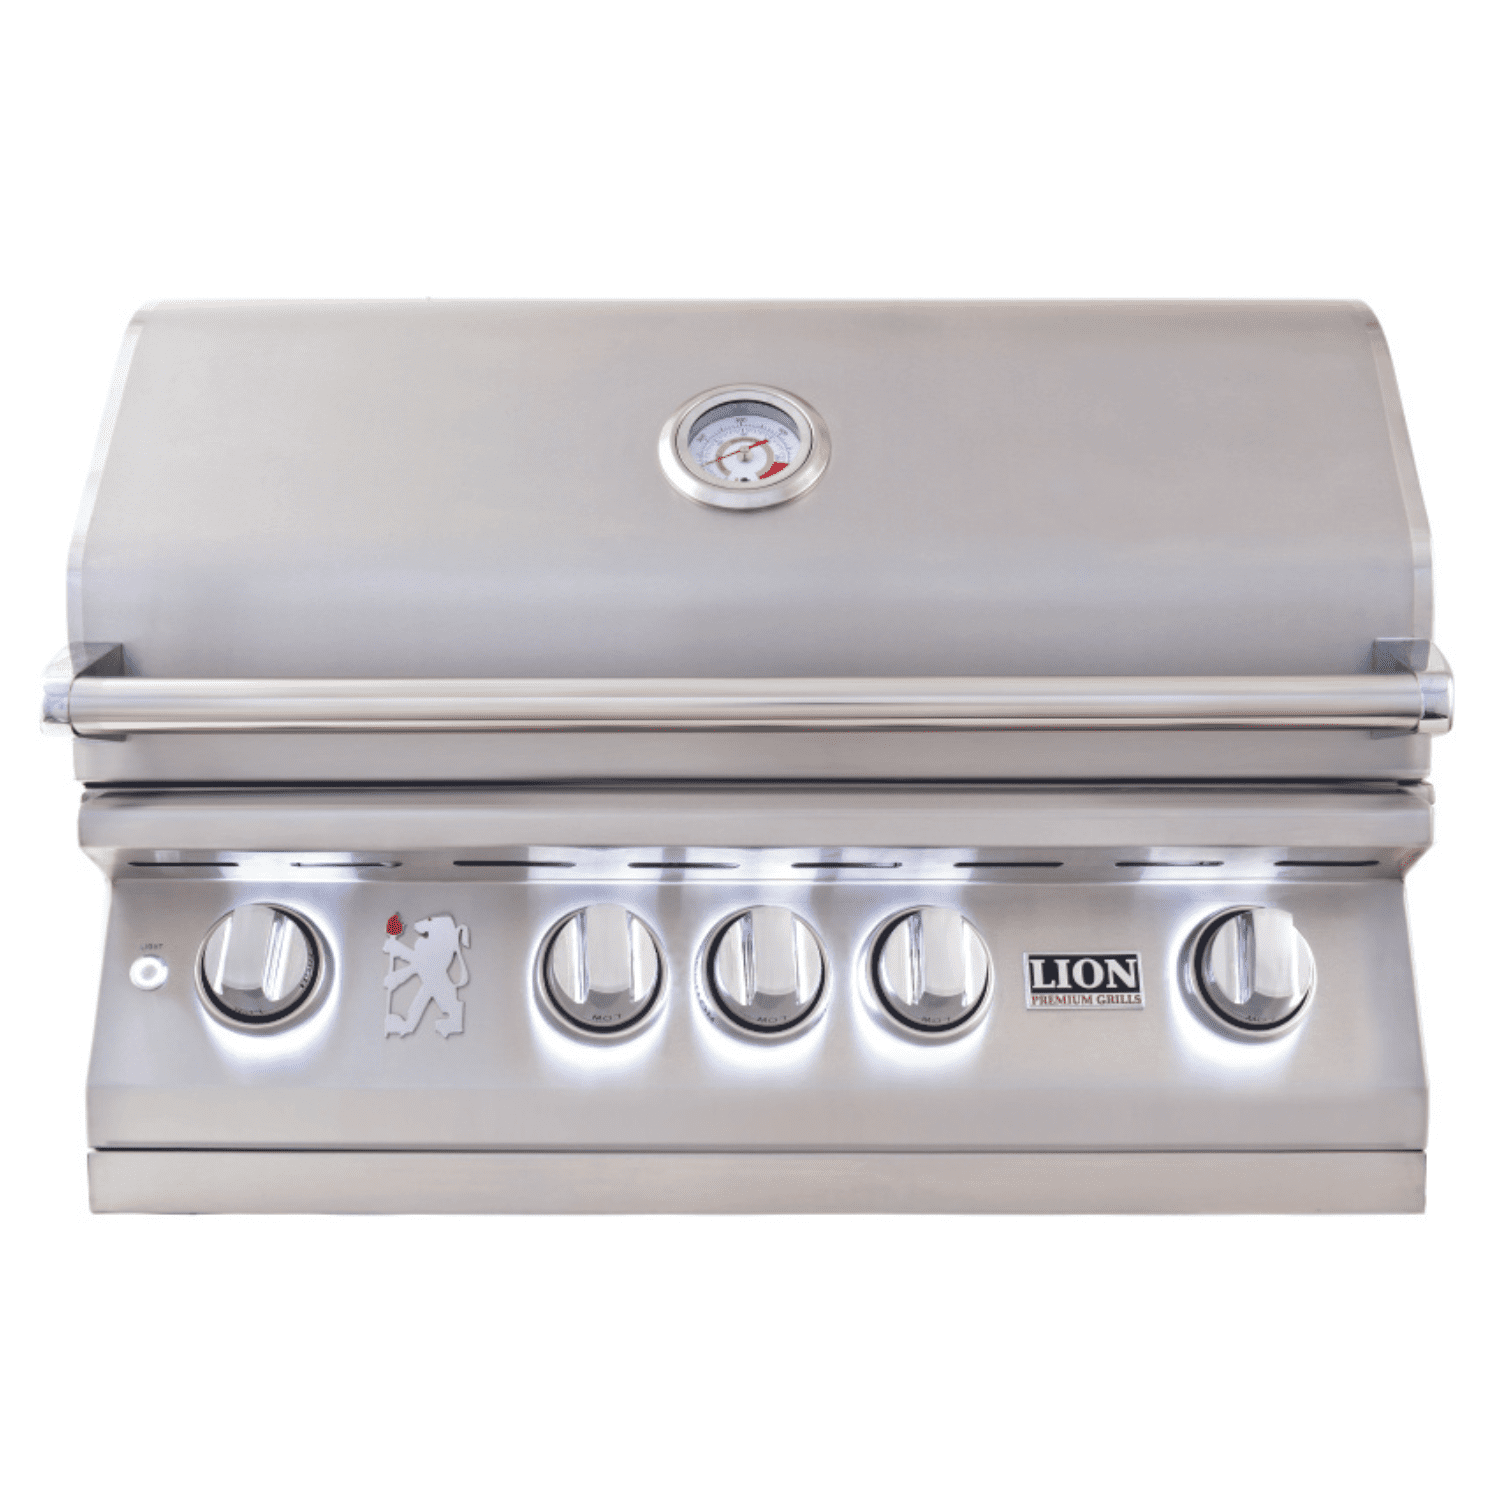 Lion 32 Grill